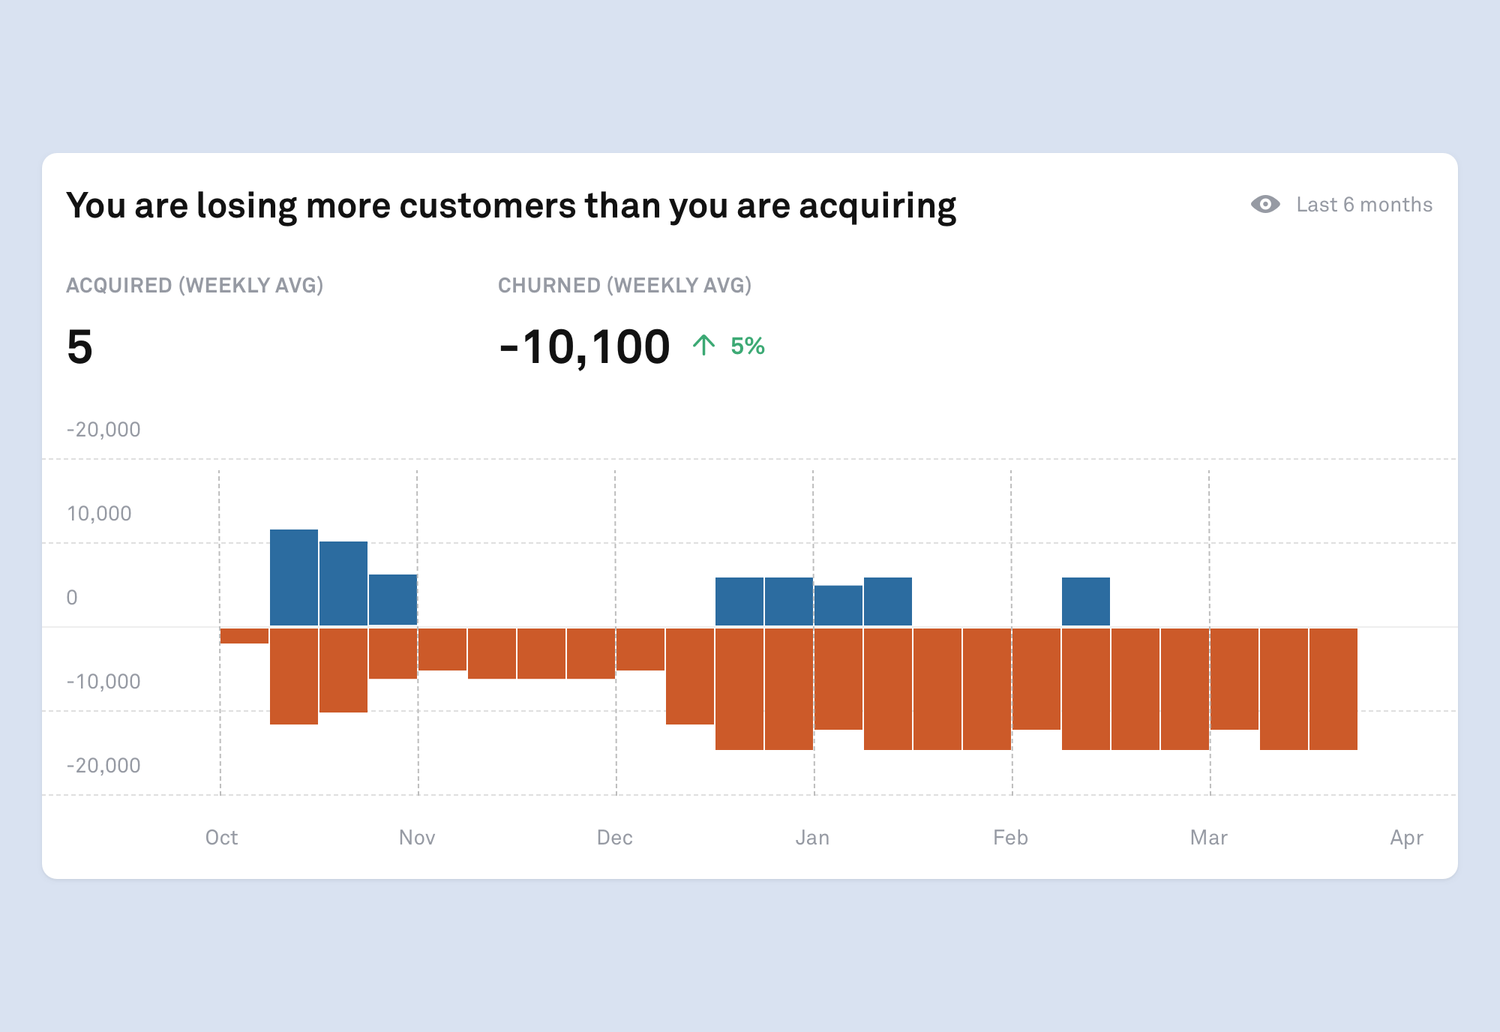 Chart showing churn and acquired customers